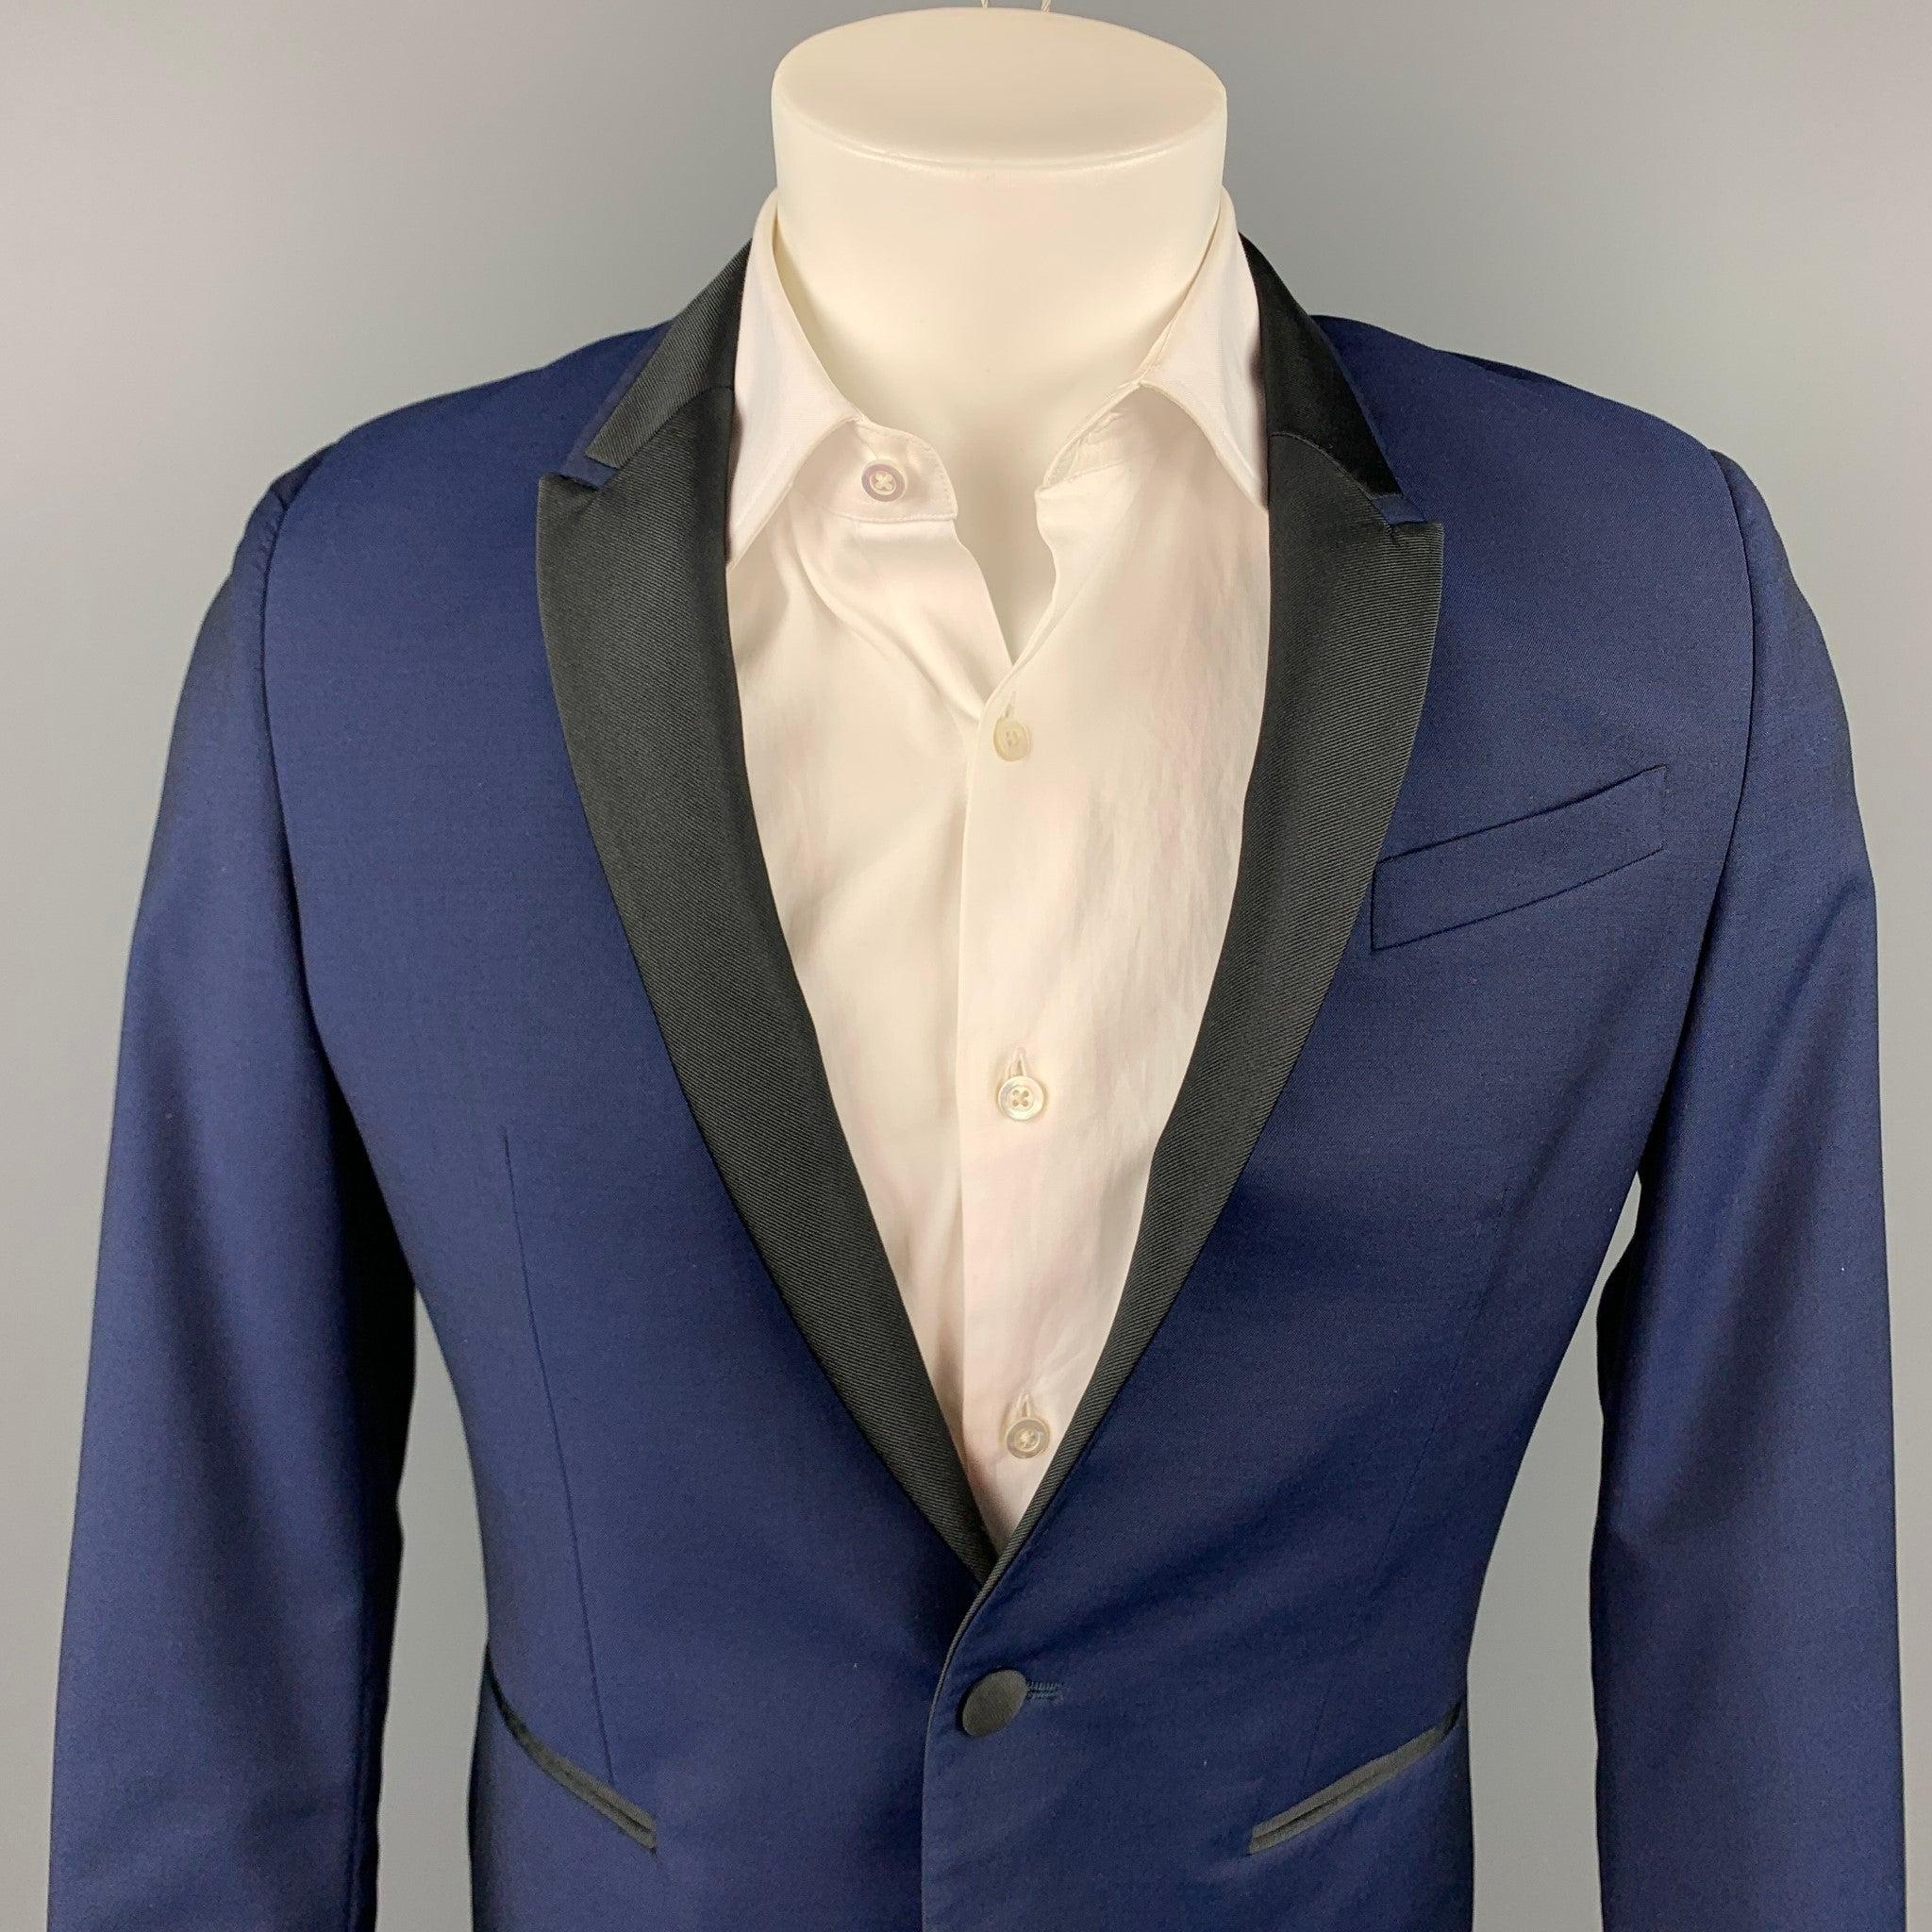 PAUL SMITH sport coat comes in a navy wool / mohair with a full liner featuring a peak lapel, slit pockets, and a single button closure. Made in Italy.Very Good
Pre-Owned Condition. 

Marked:   38 R 

Measurements: 
 
Shoulder: 16.5 inches  Chest: